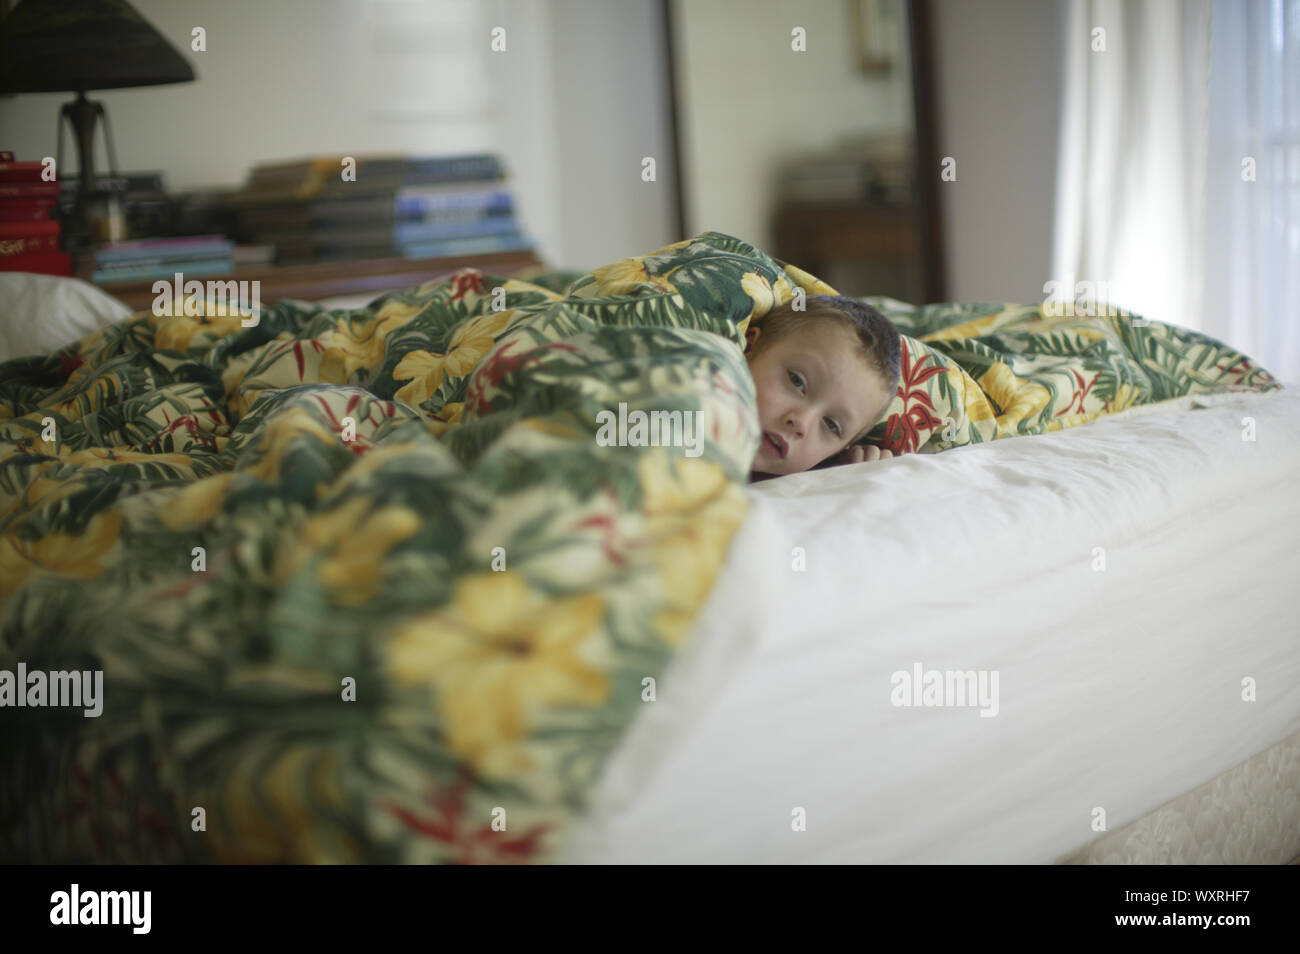 Boy peeking out from under bedcovers Stock Photo